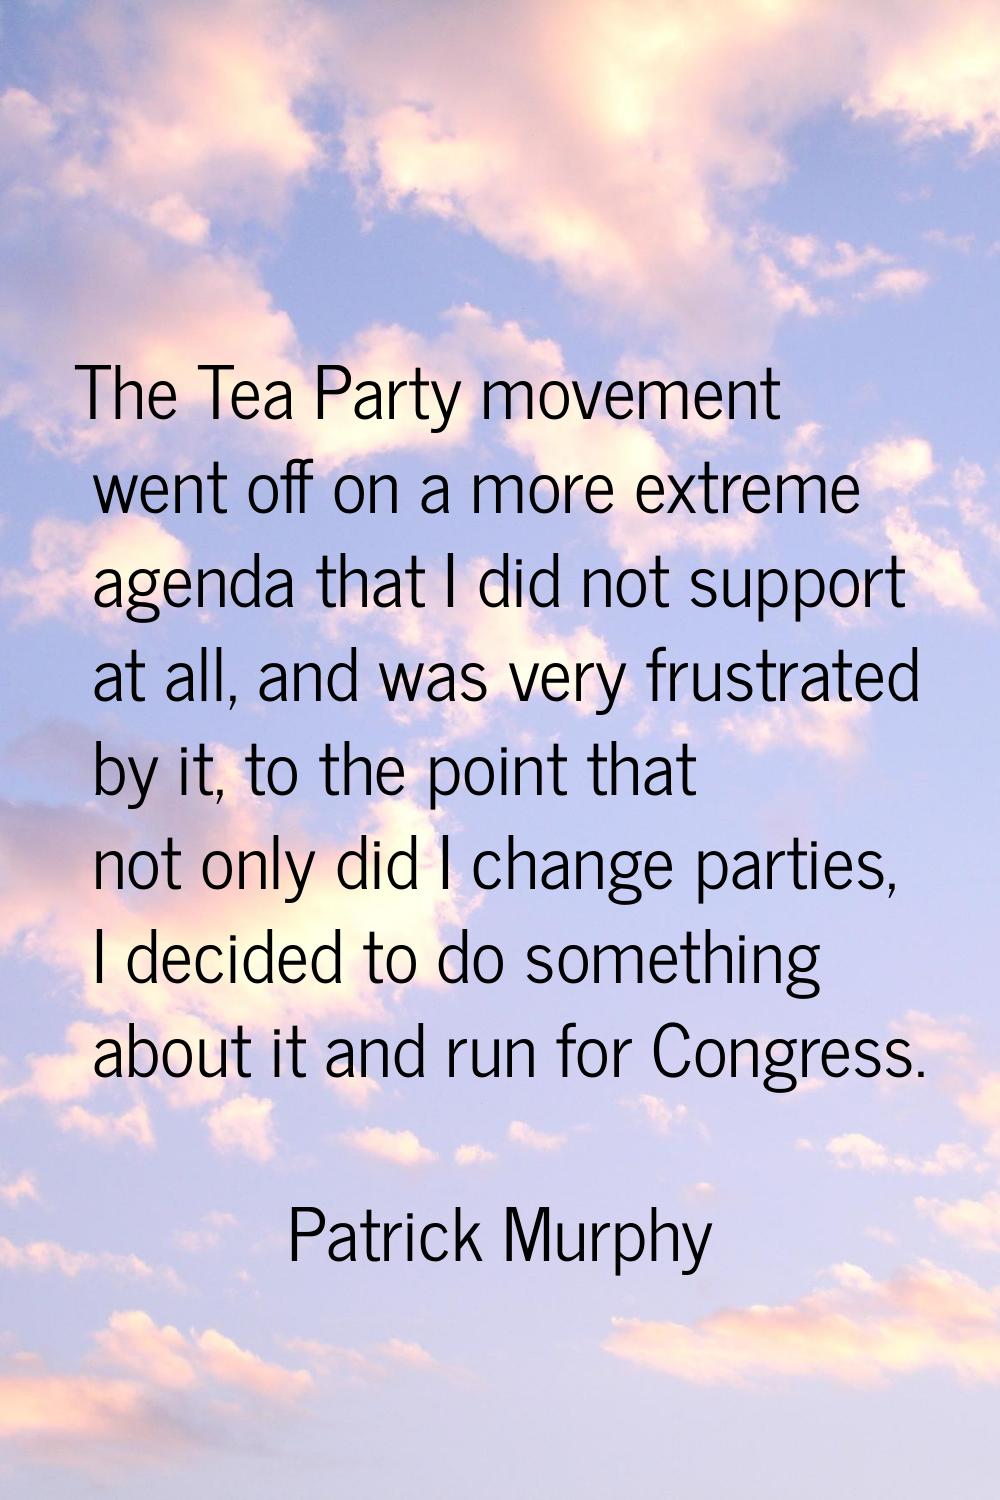 The Tea Party movement went off on a more extreme agenda that I did not support at all, and was ver